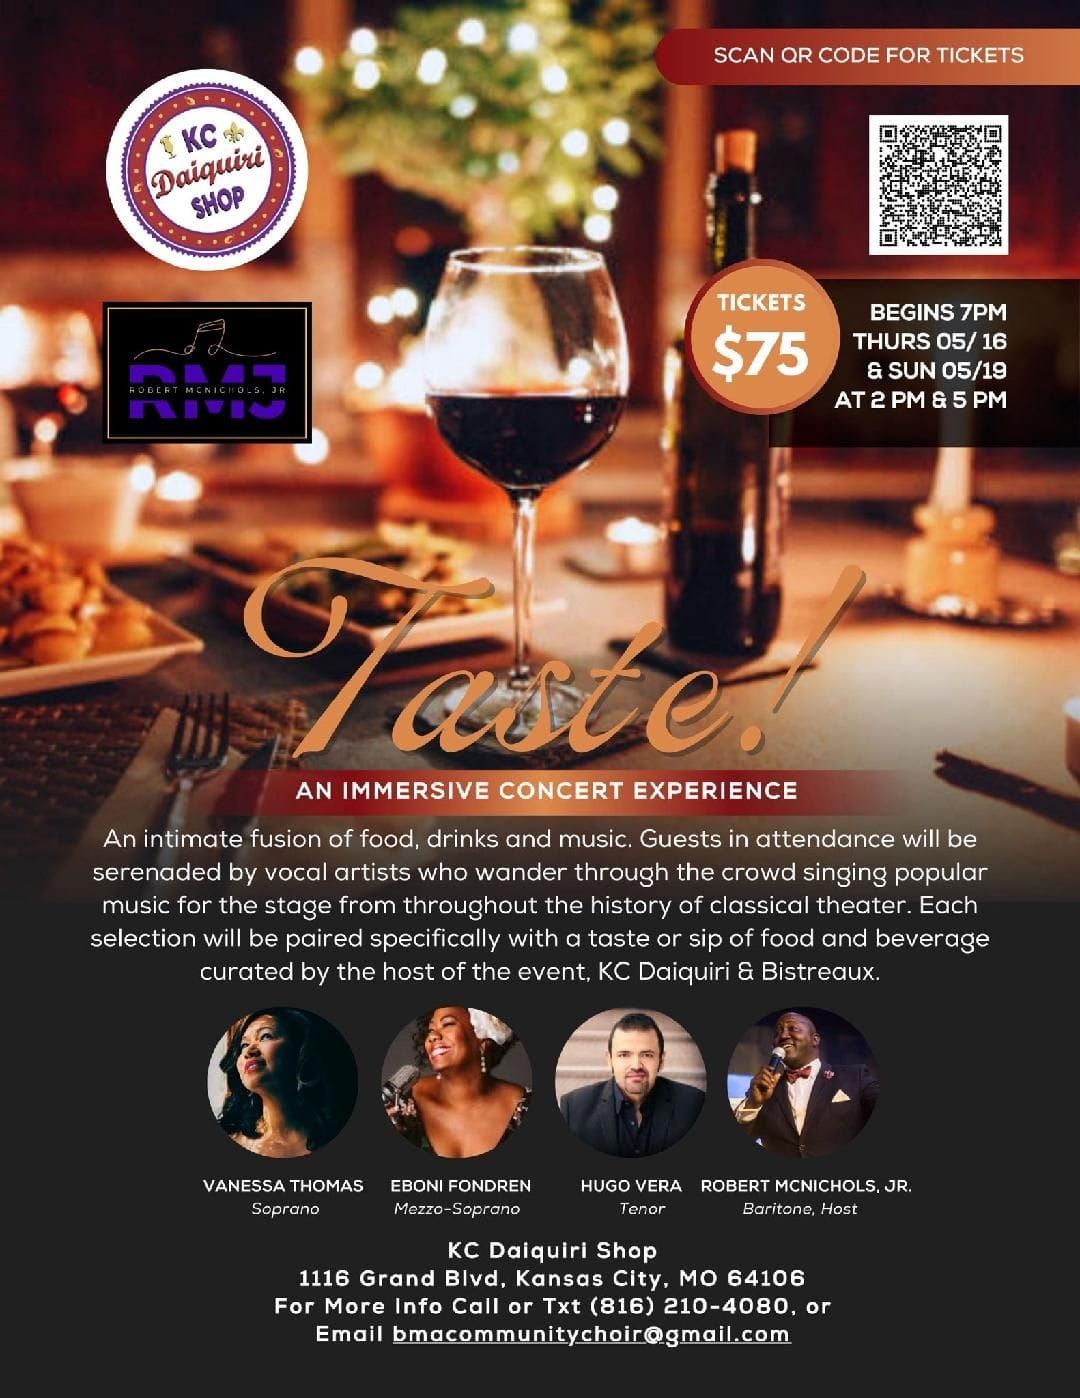 TASTE!: An immersive concert experience.